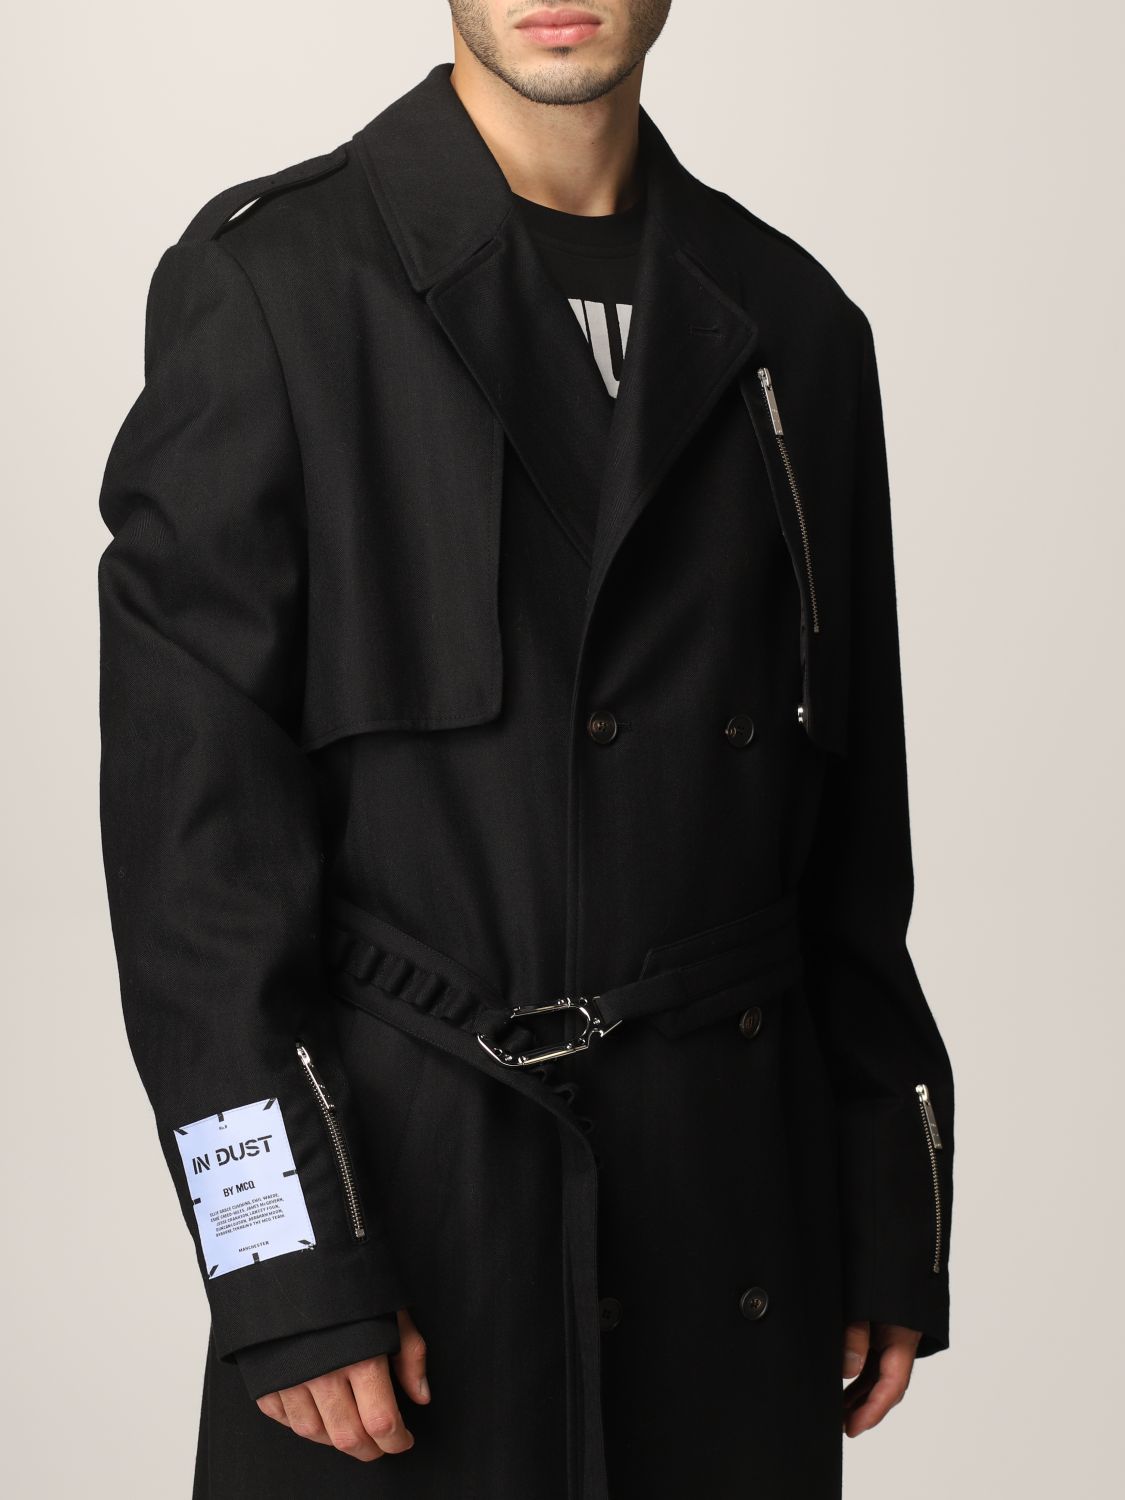 Trench coat Mcq: Icon In Dust trench coat by McQ in gabardine black 5